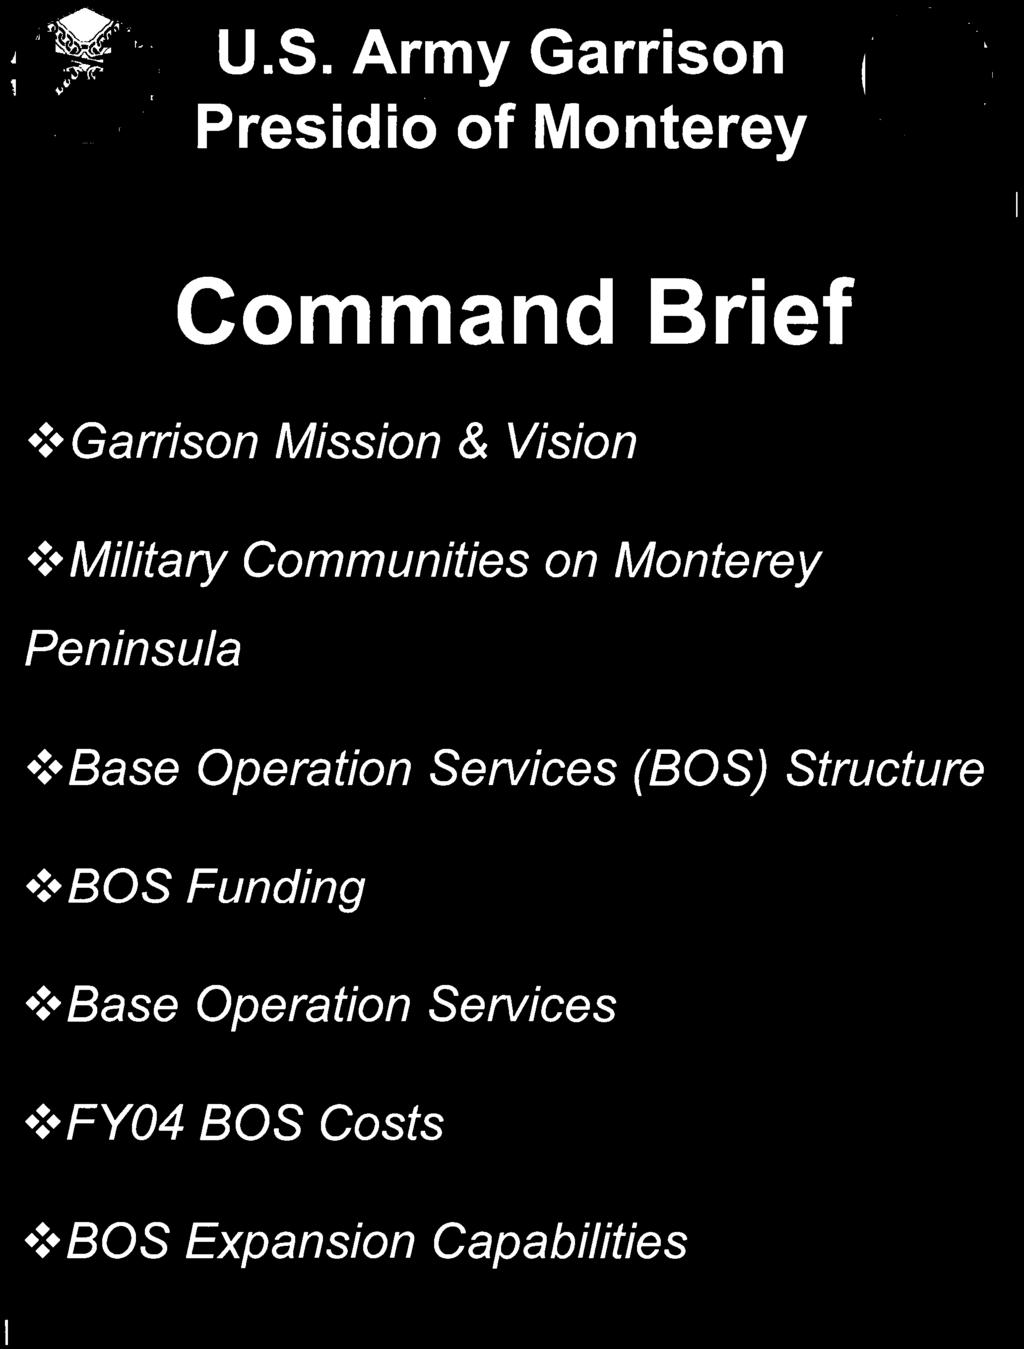 +Base Operation Services (BOS) Structure +3 BOS Funding *:+ Base